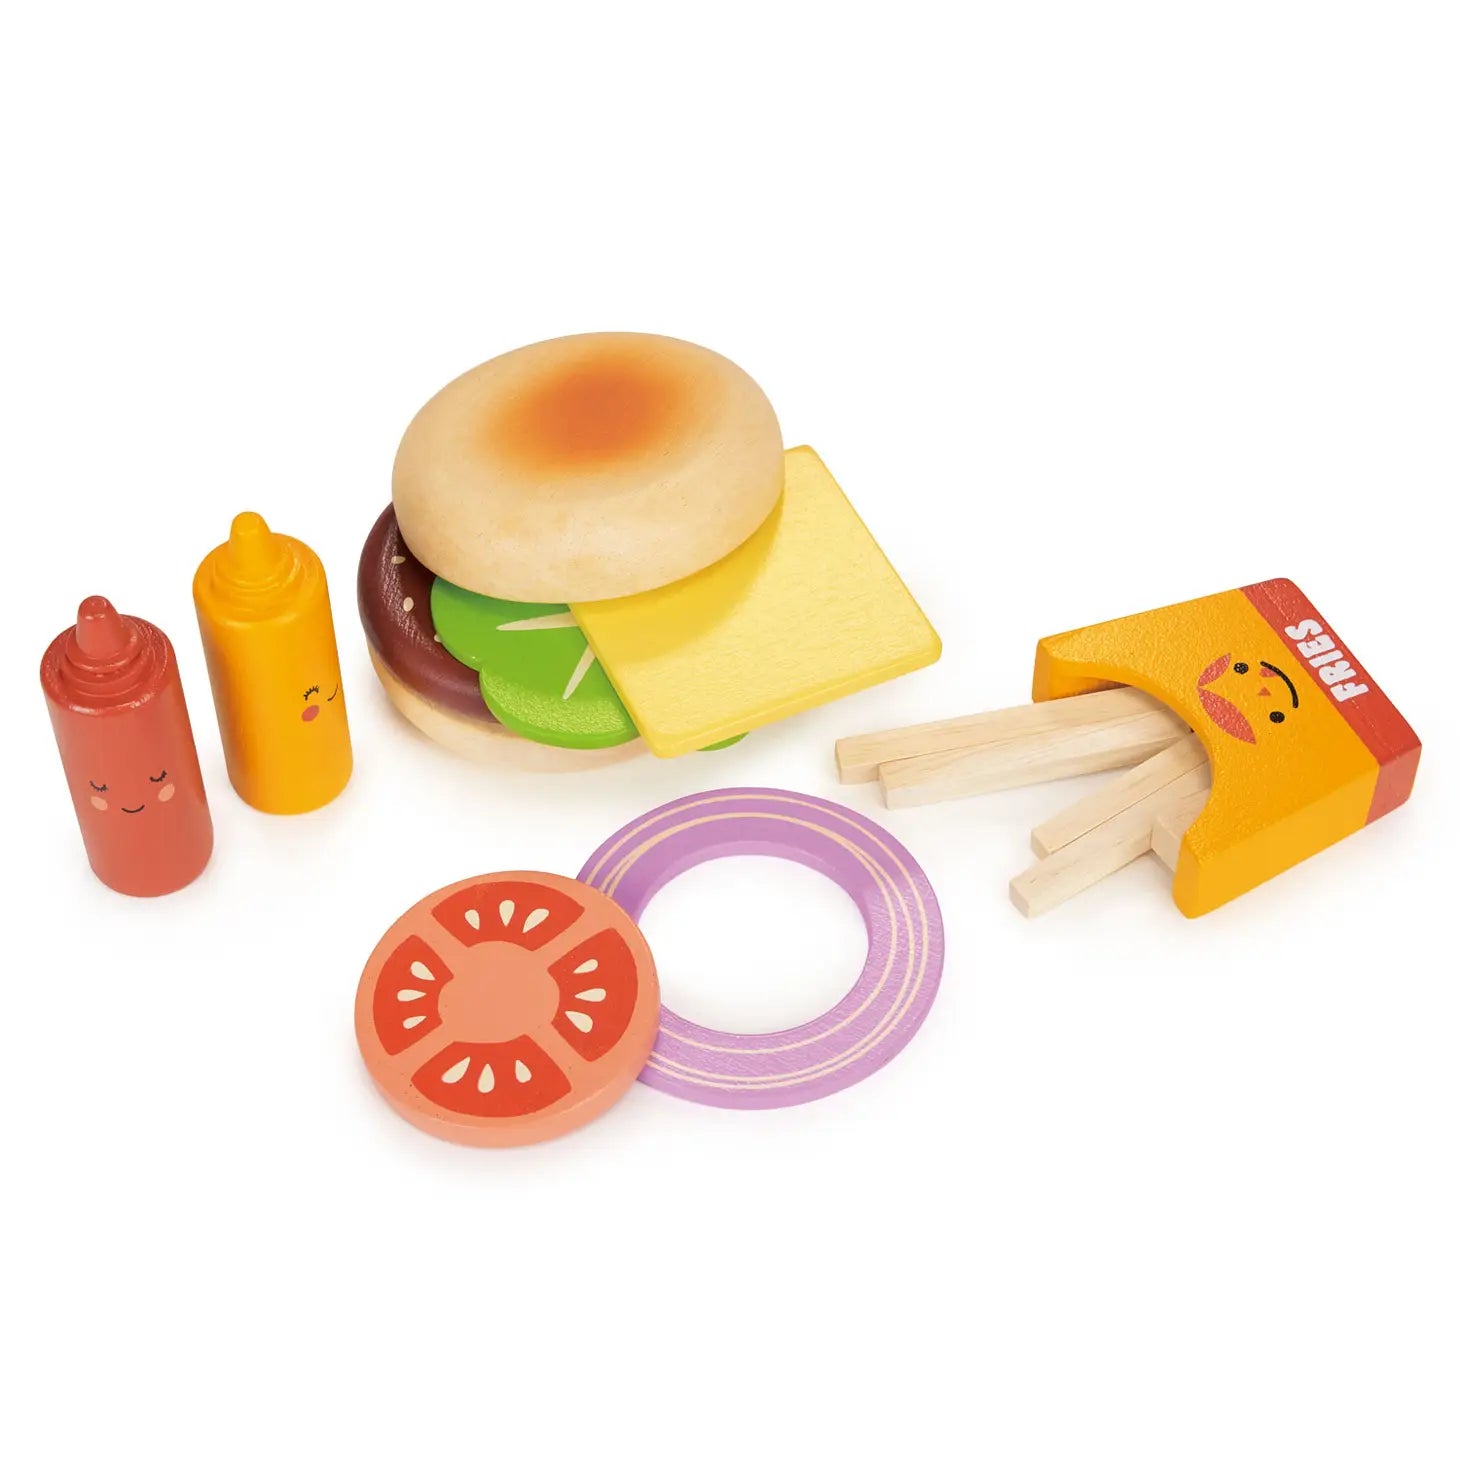 Wooden Toy Take Out Burger Set